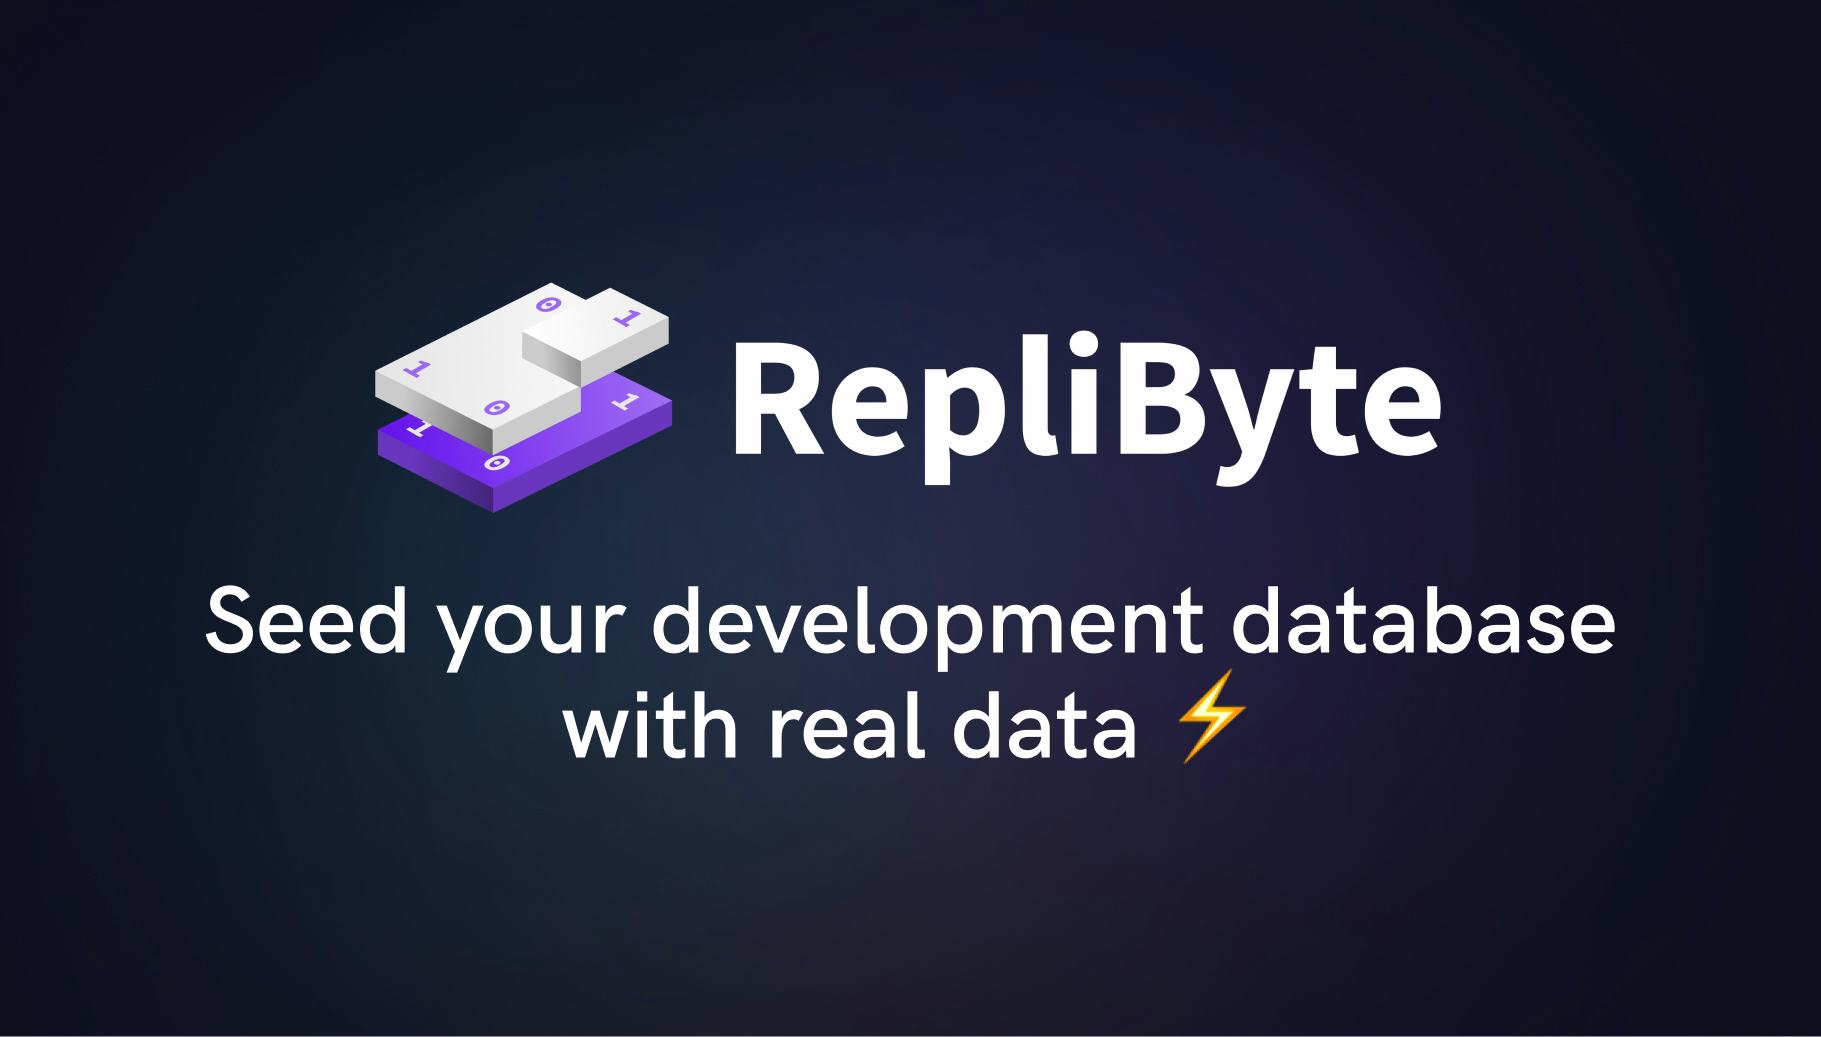 Announcement: RepliByte - an open-source tool to seed your development database with real data ⚡️